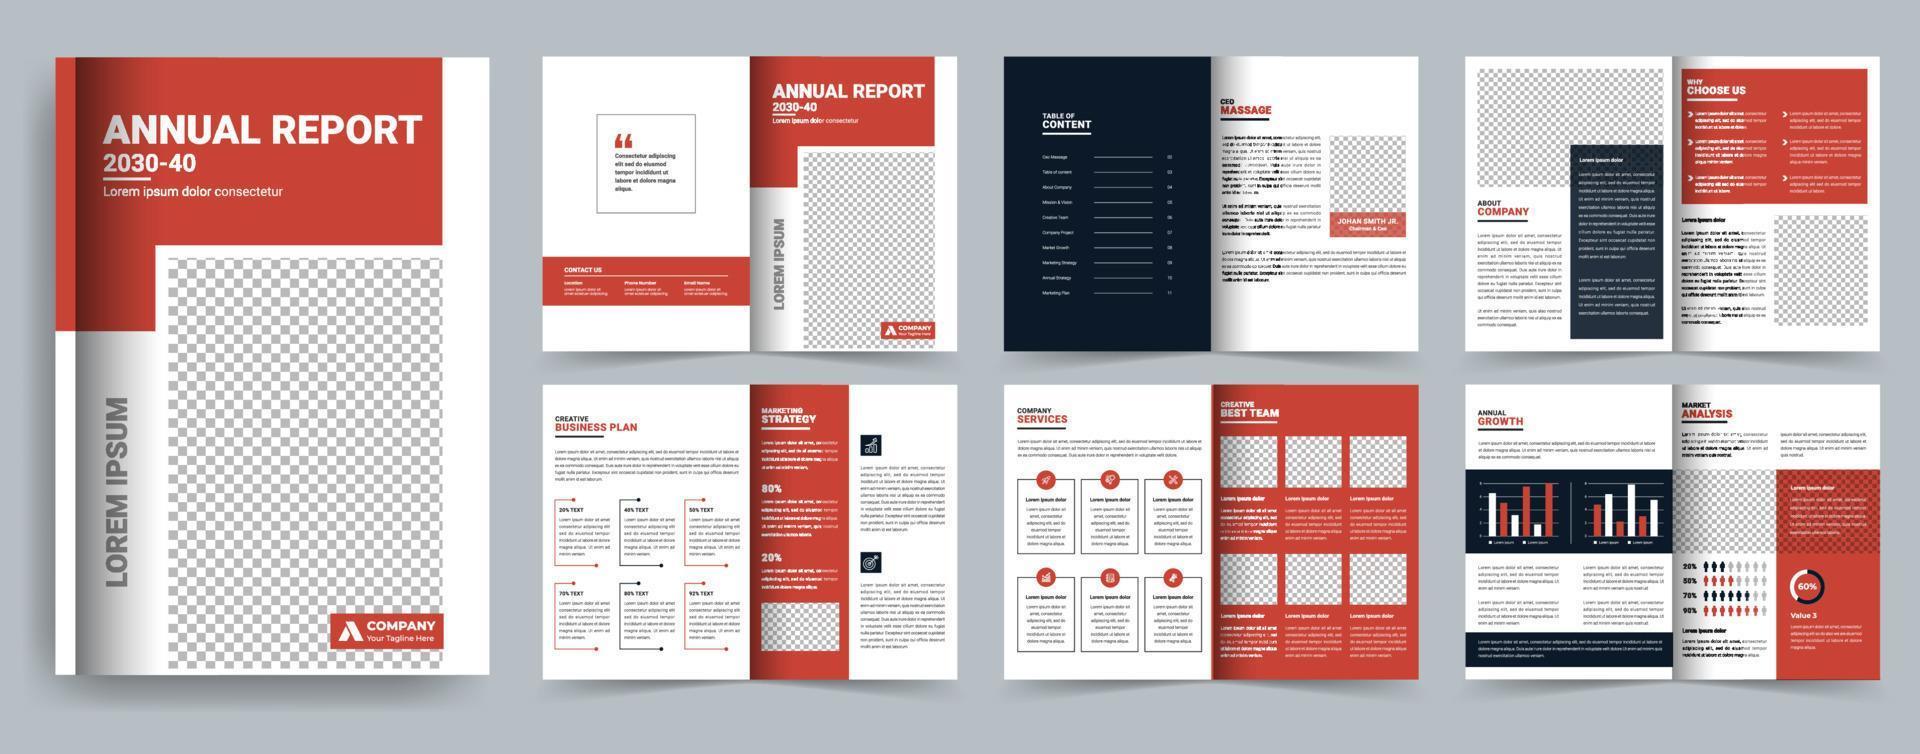 Minimal business brochure template and annual report or company profile or project proposal layout vector